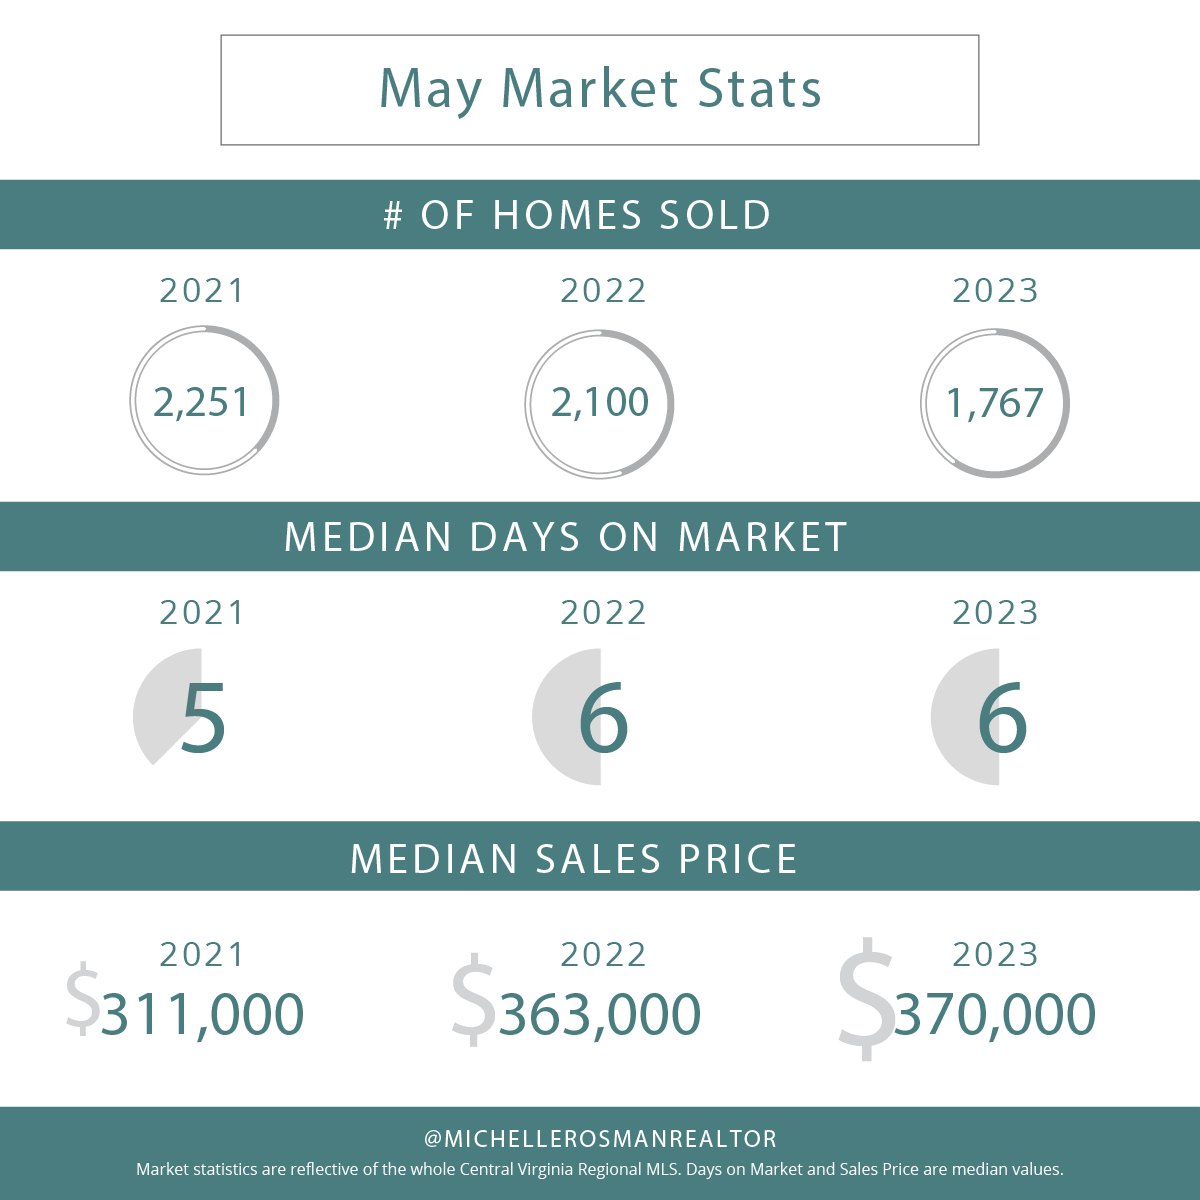 May 2023 Market Stats infographic